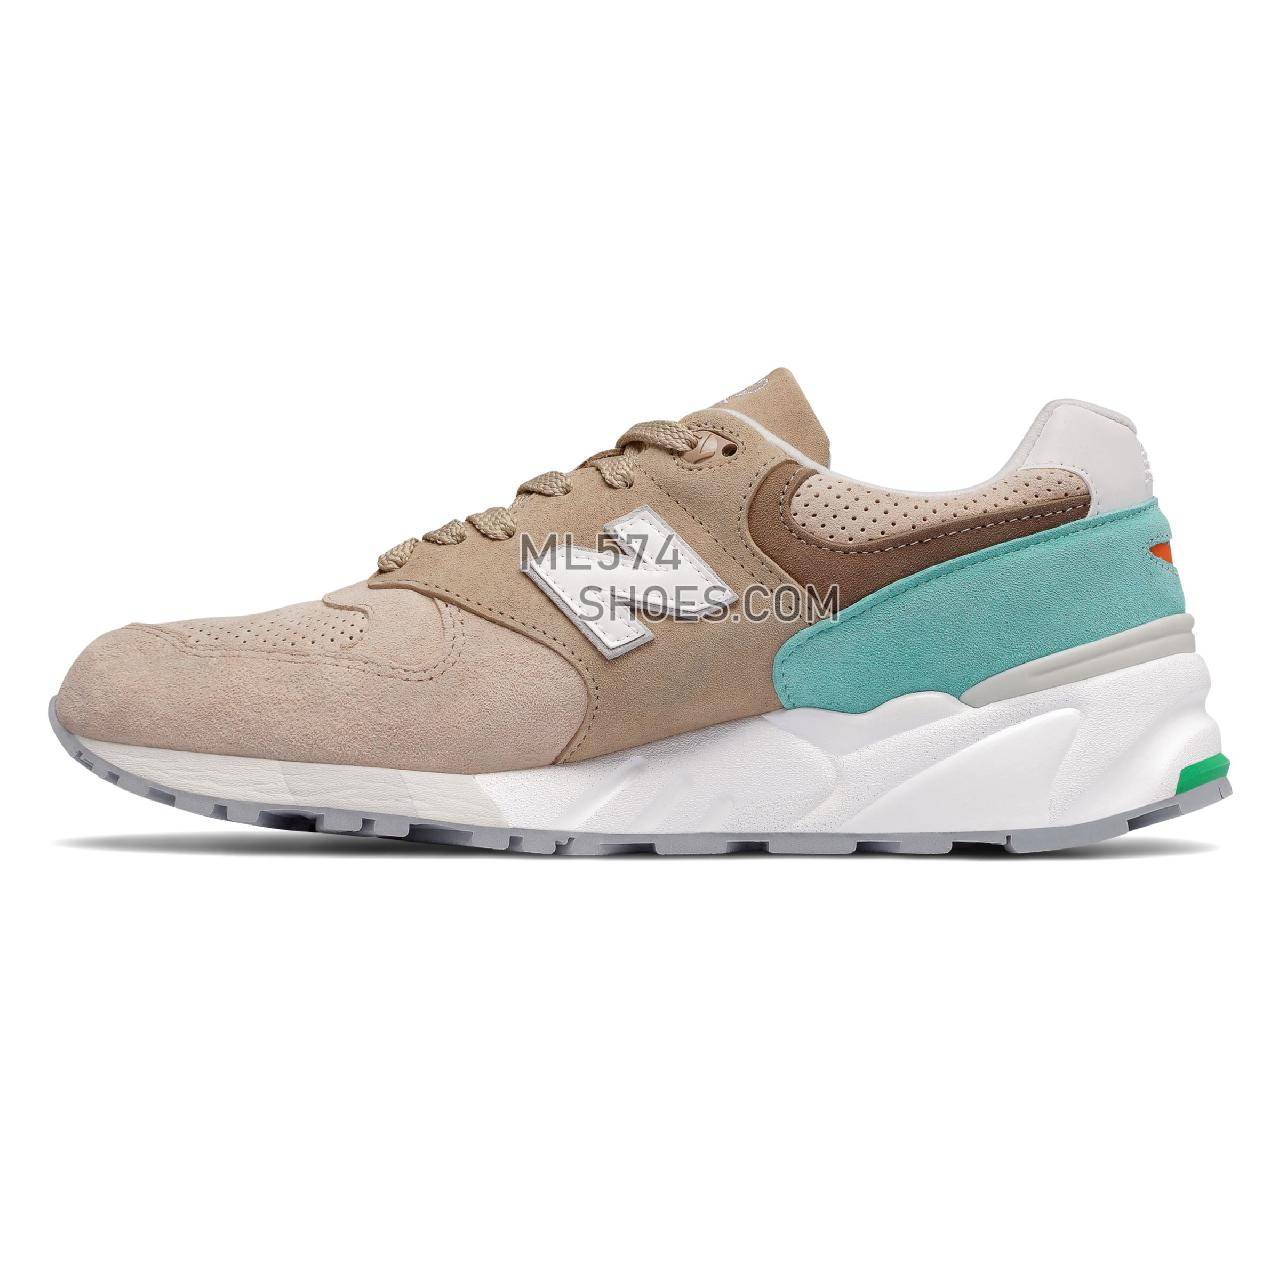 New Balance 999 Made in US Color Spectrum - Men's 999 - Classic Beige with Clear Sky - M999CSS